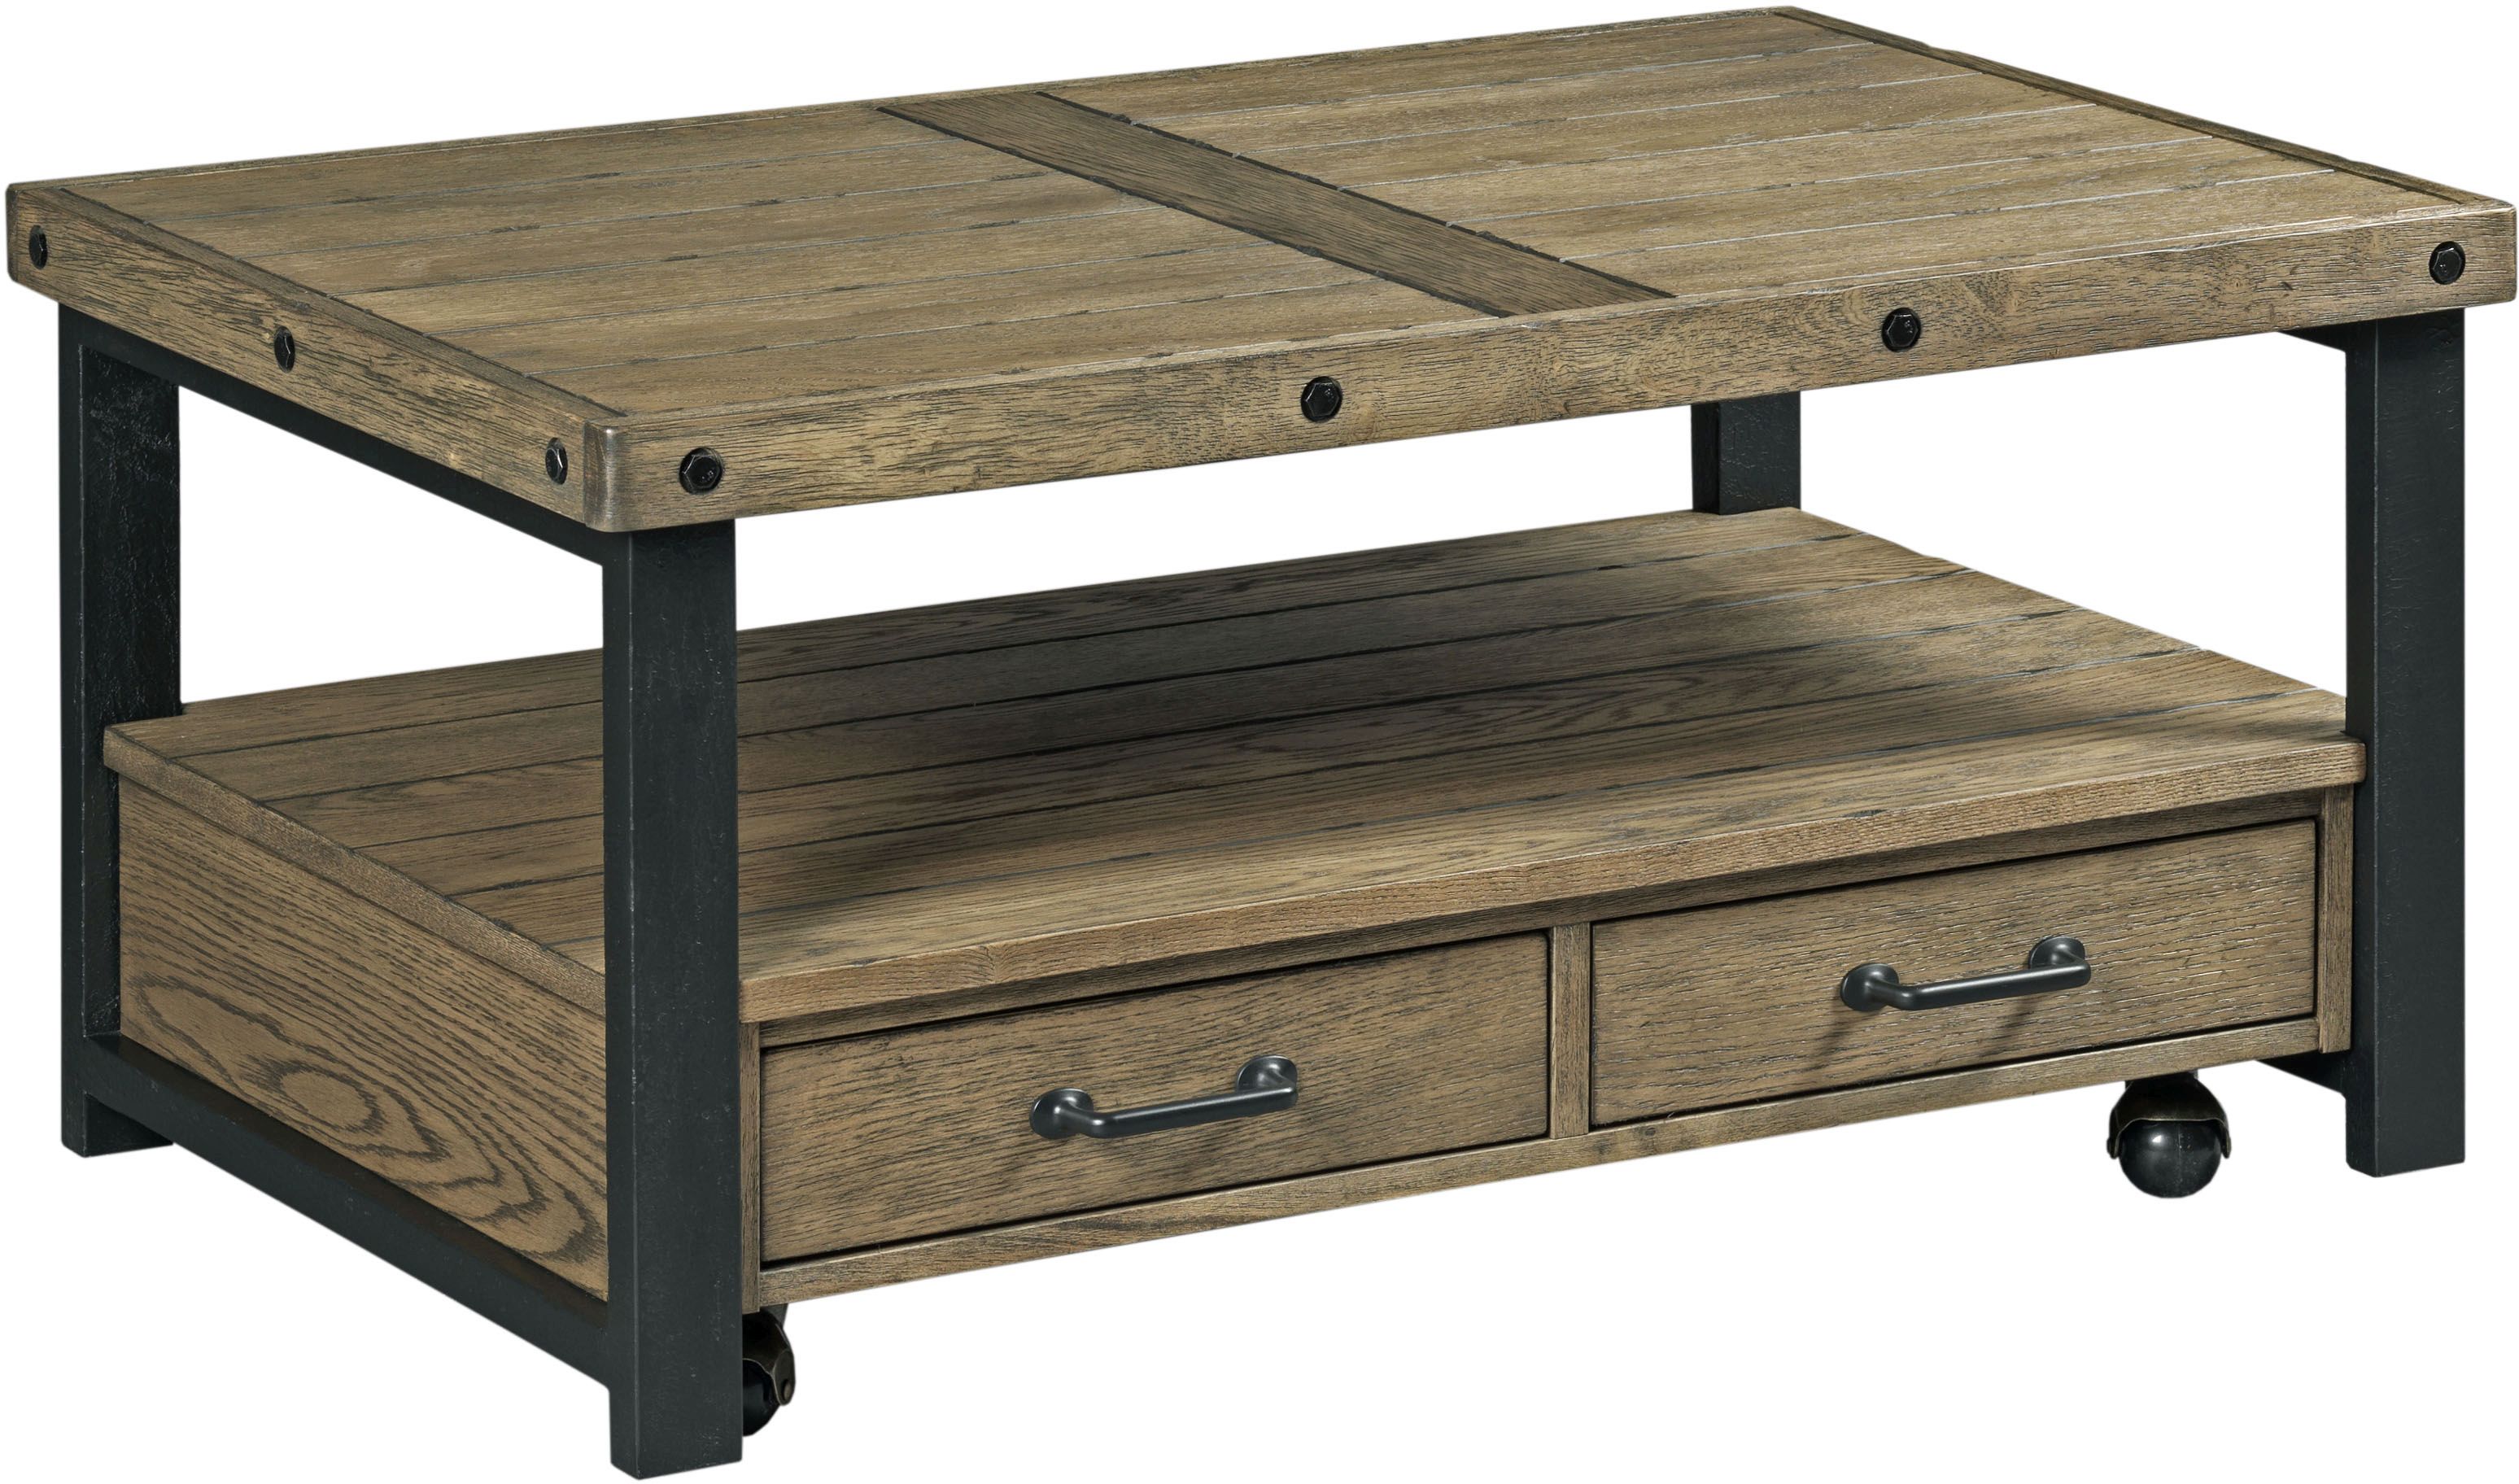 England Furniture Workbench Small Rectangular Cocktail Table-H790913